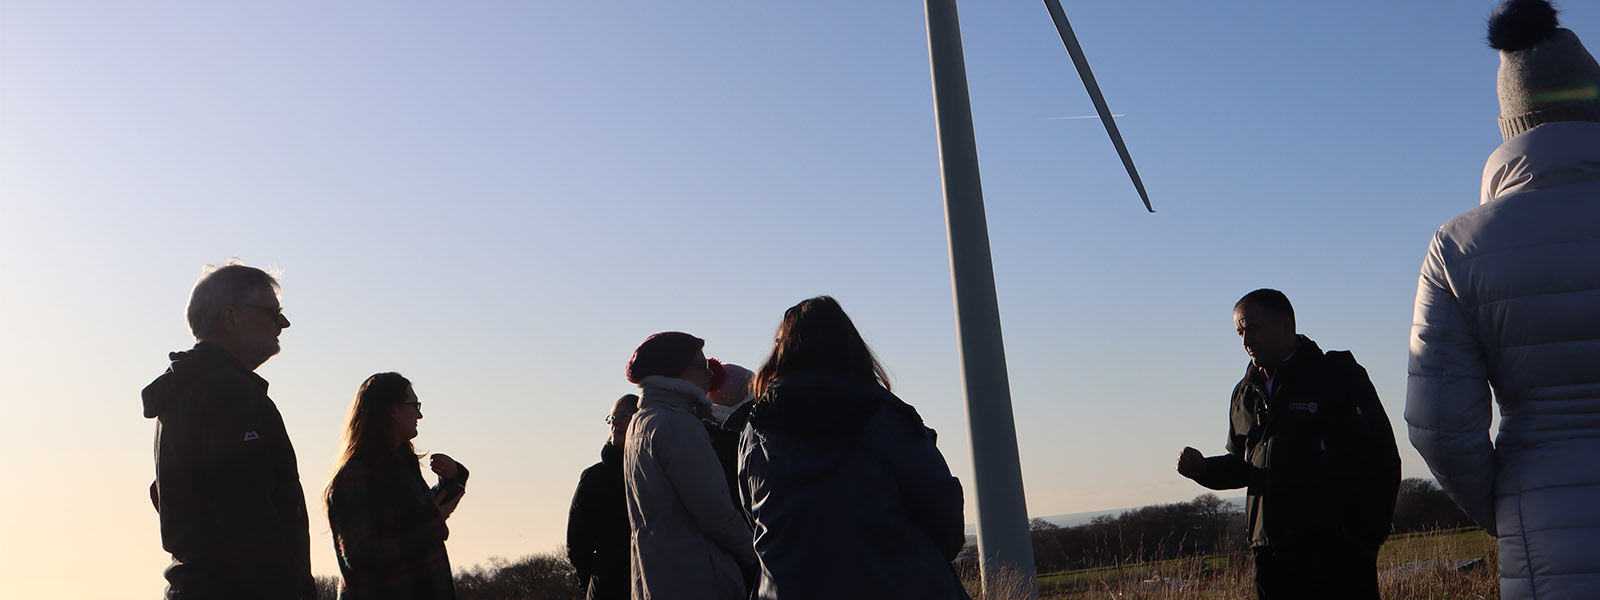 The Ƶ Manager hosting a tour of the wind turbine